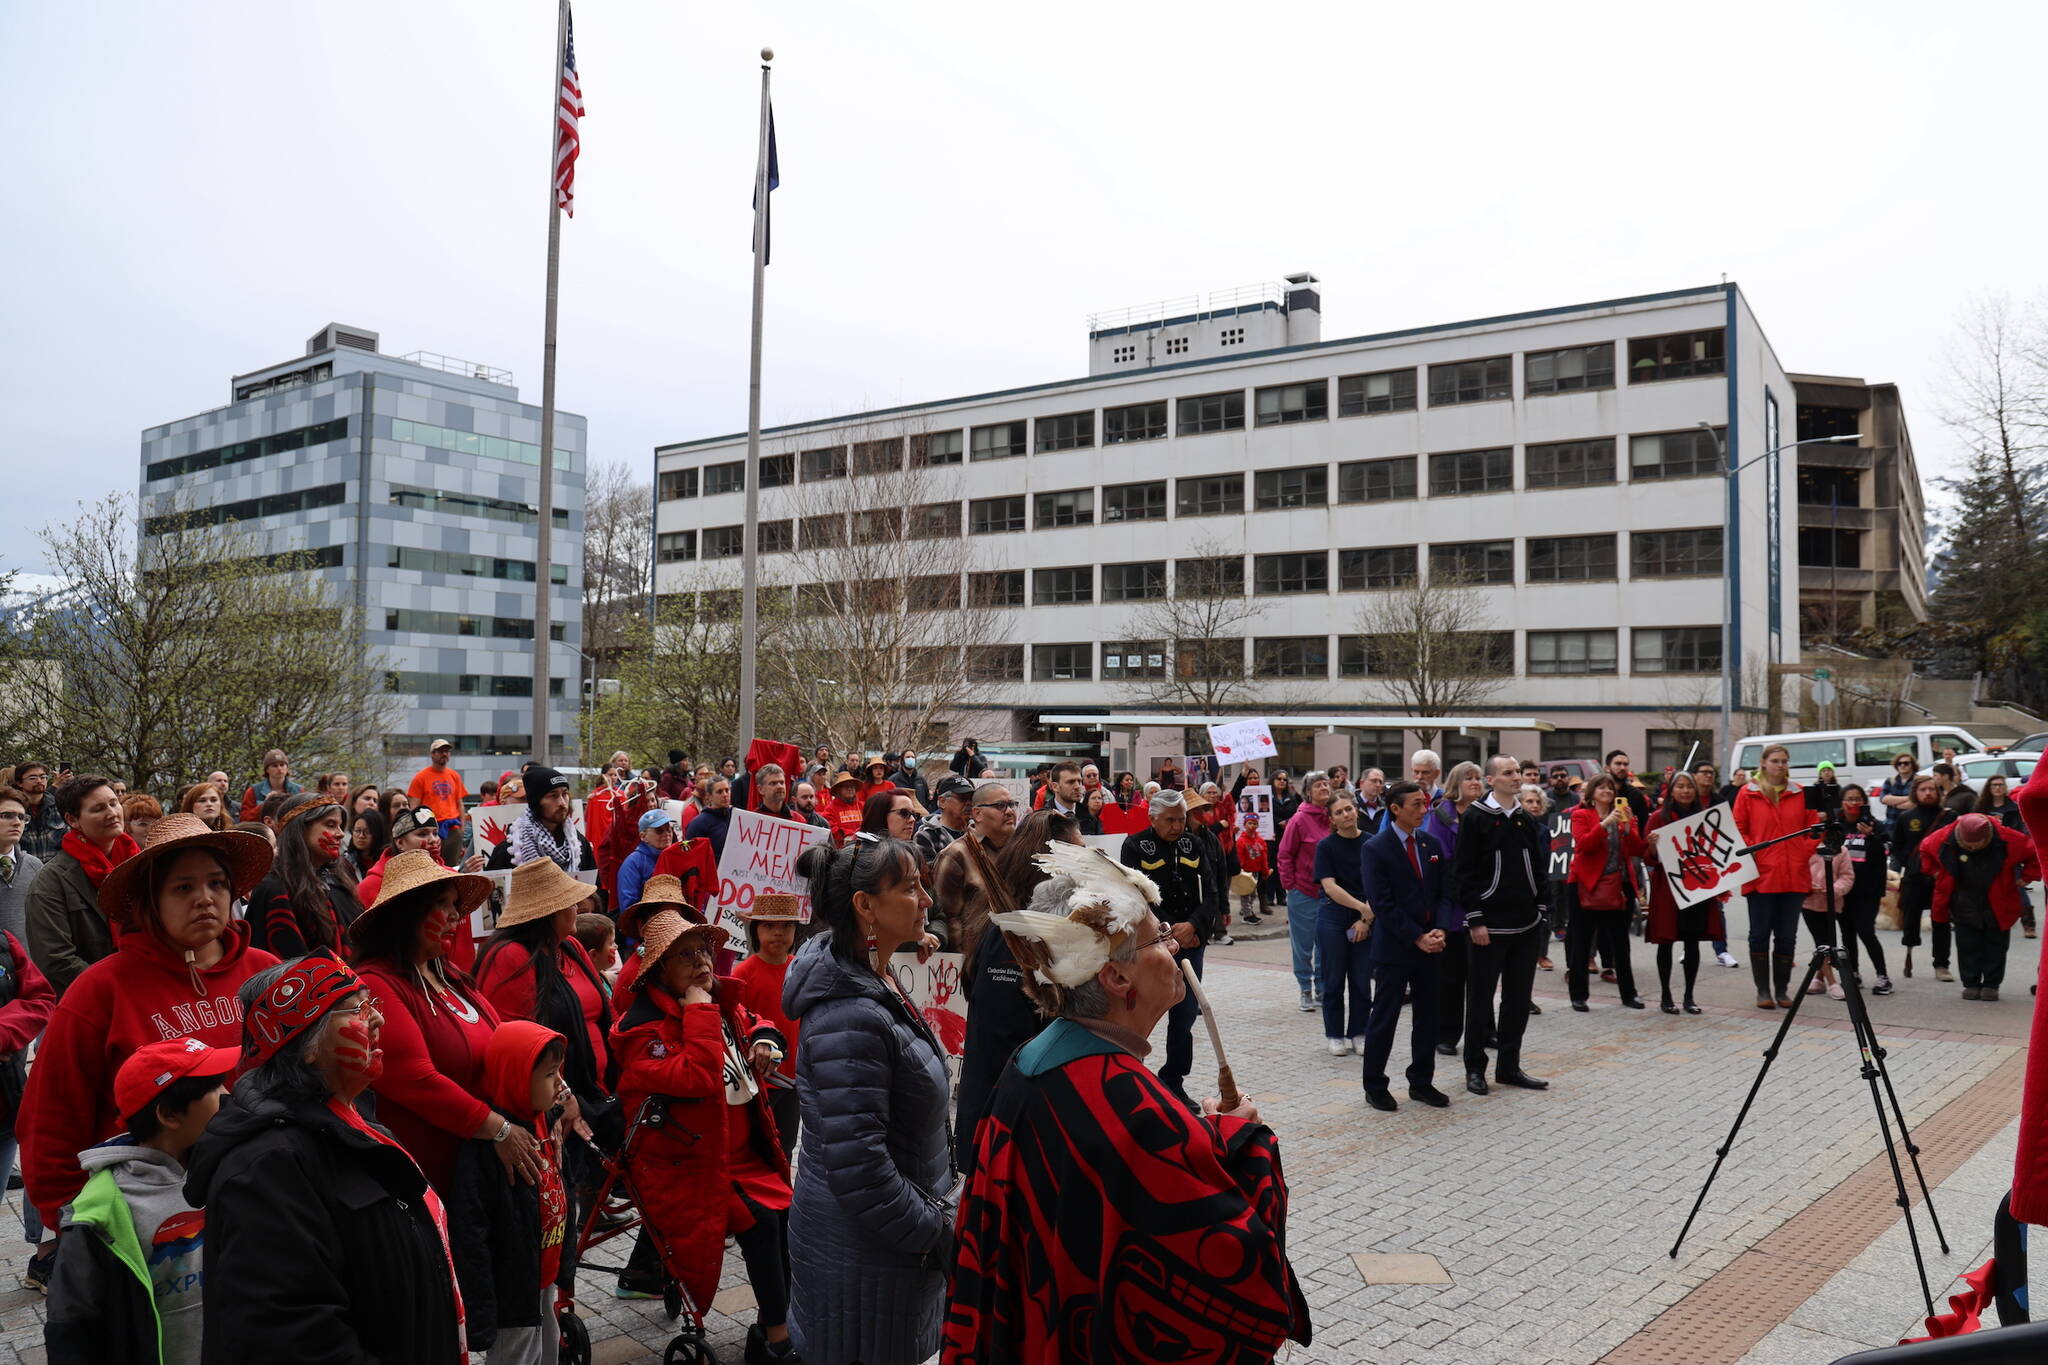 A crowd gathers at the steps of the Alaska State Capitol Friday evening for a rally and march to recognize Missing and Murdered Indigenous Peoples Awareness Day held each year on May 5. (Clarise Larson / Juneau Empire)